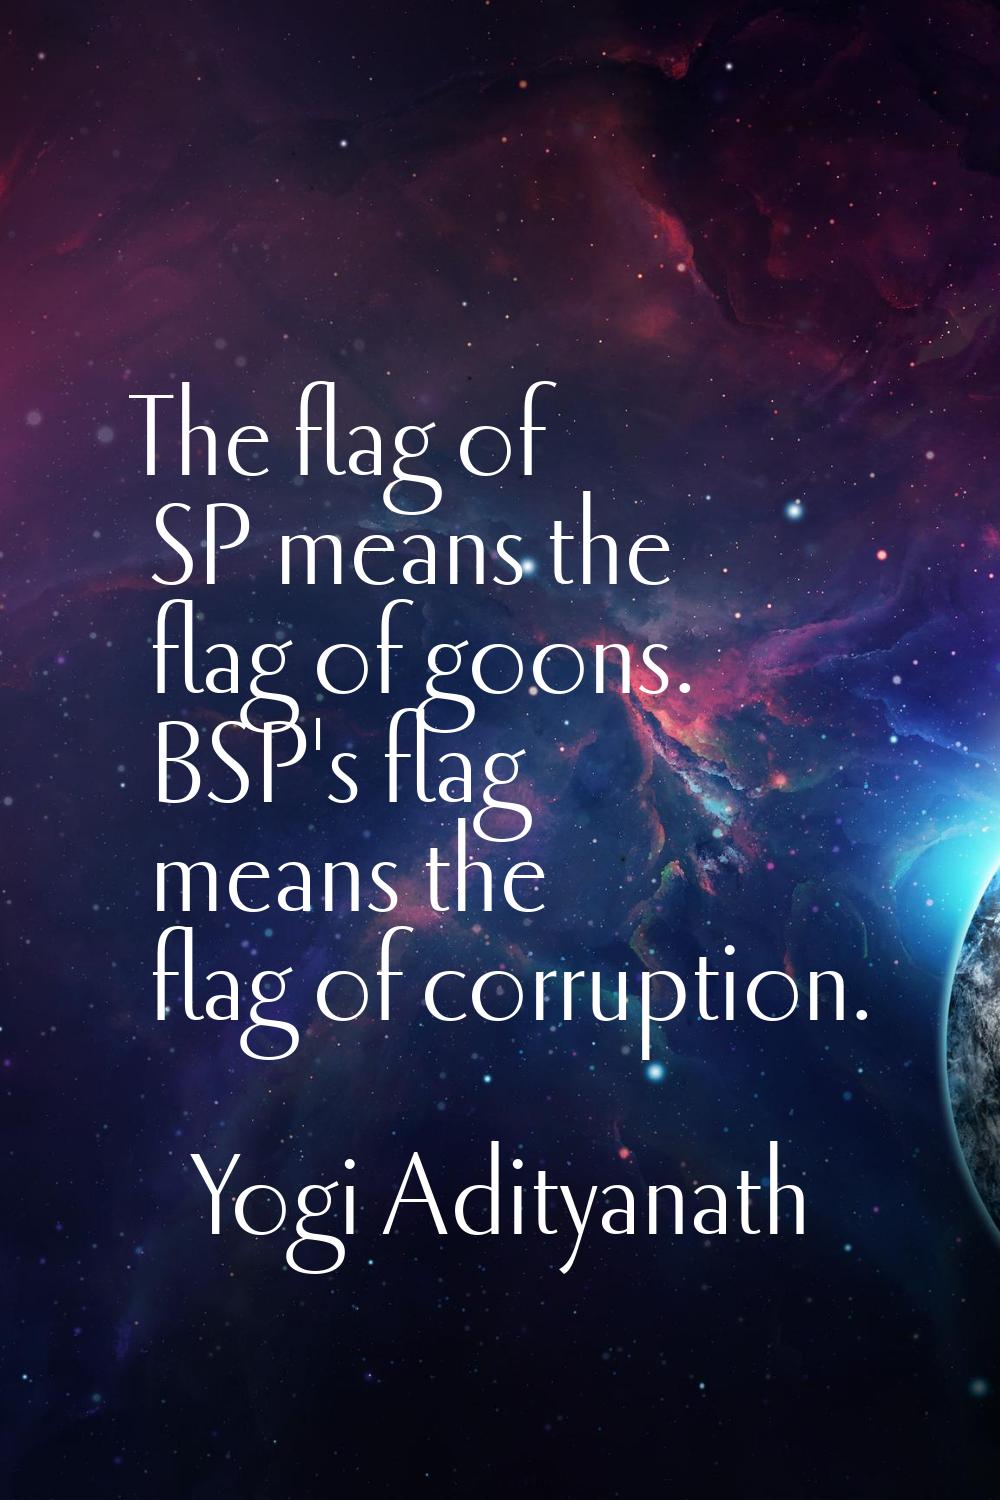 The flag of SP means the flag of goons. BSP's flag means the flag of corruption.